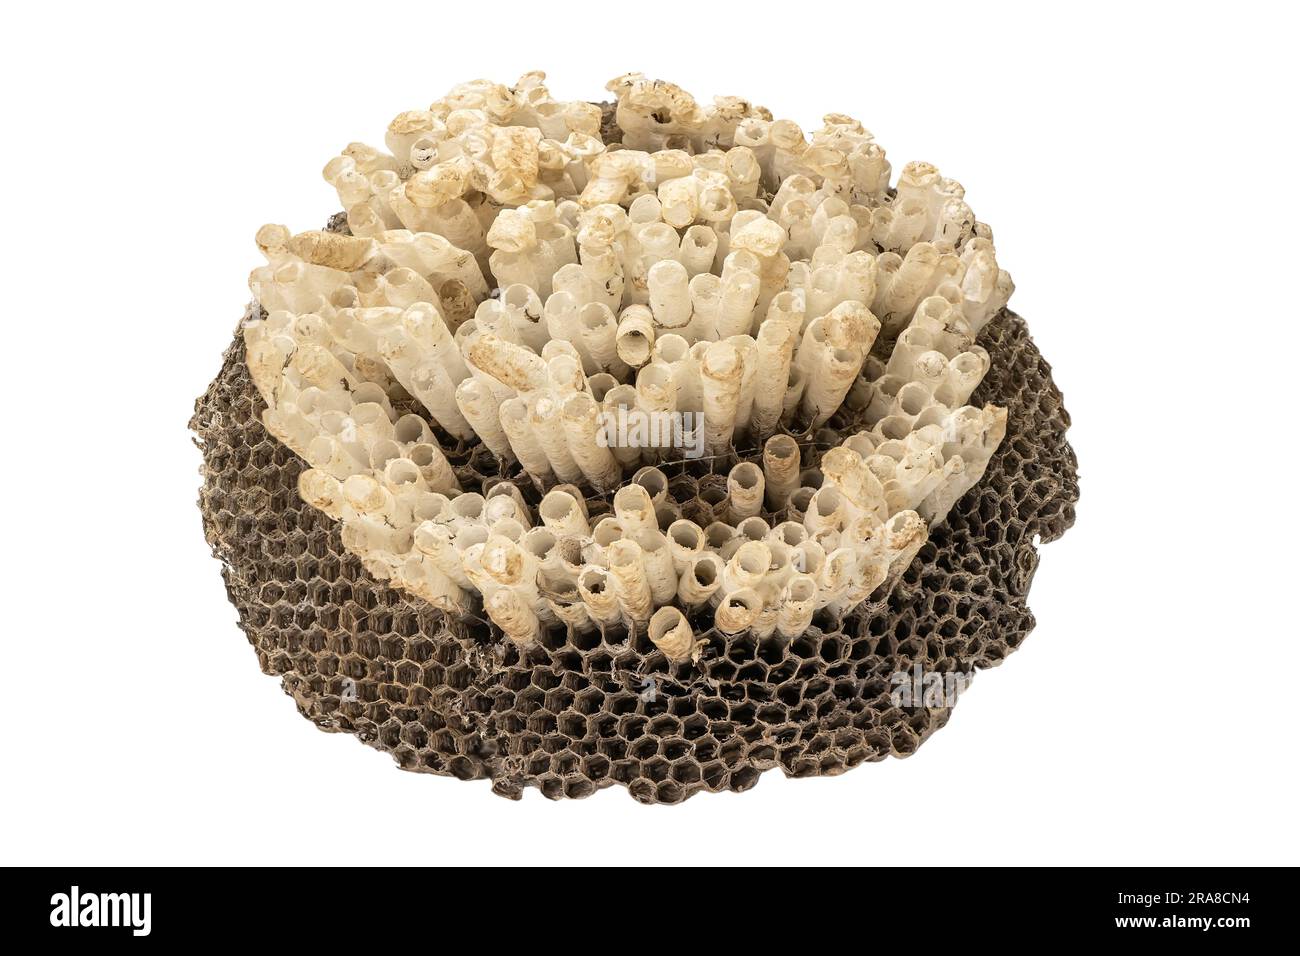 Wasp's nest or hexagonal decorative design isolated on a white background. Stock Photo